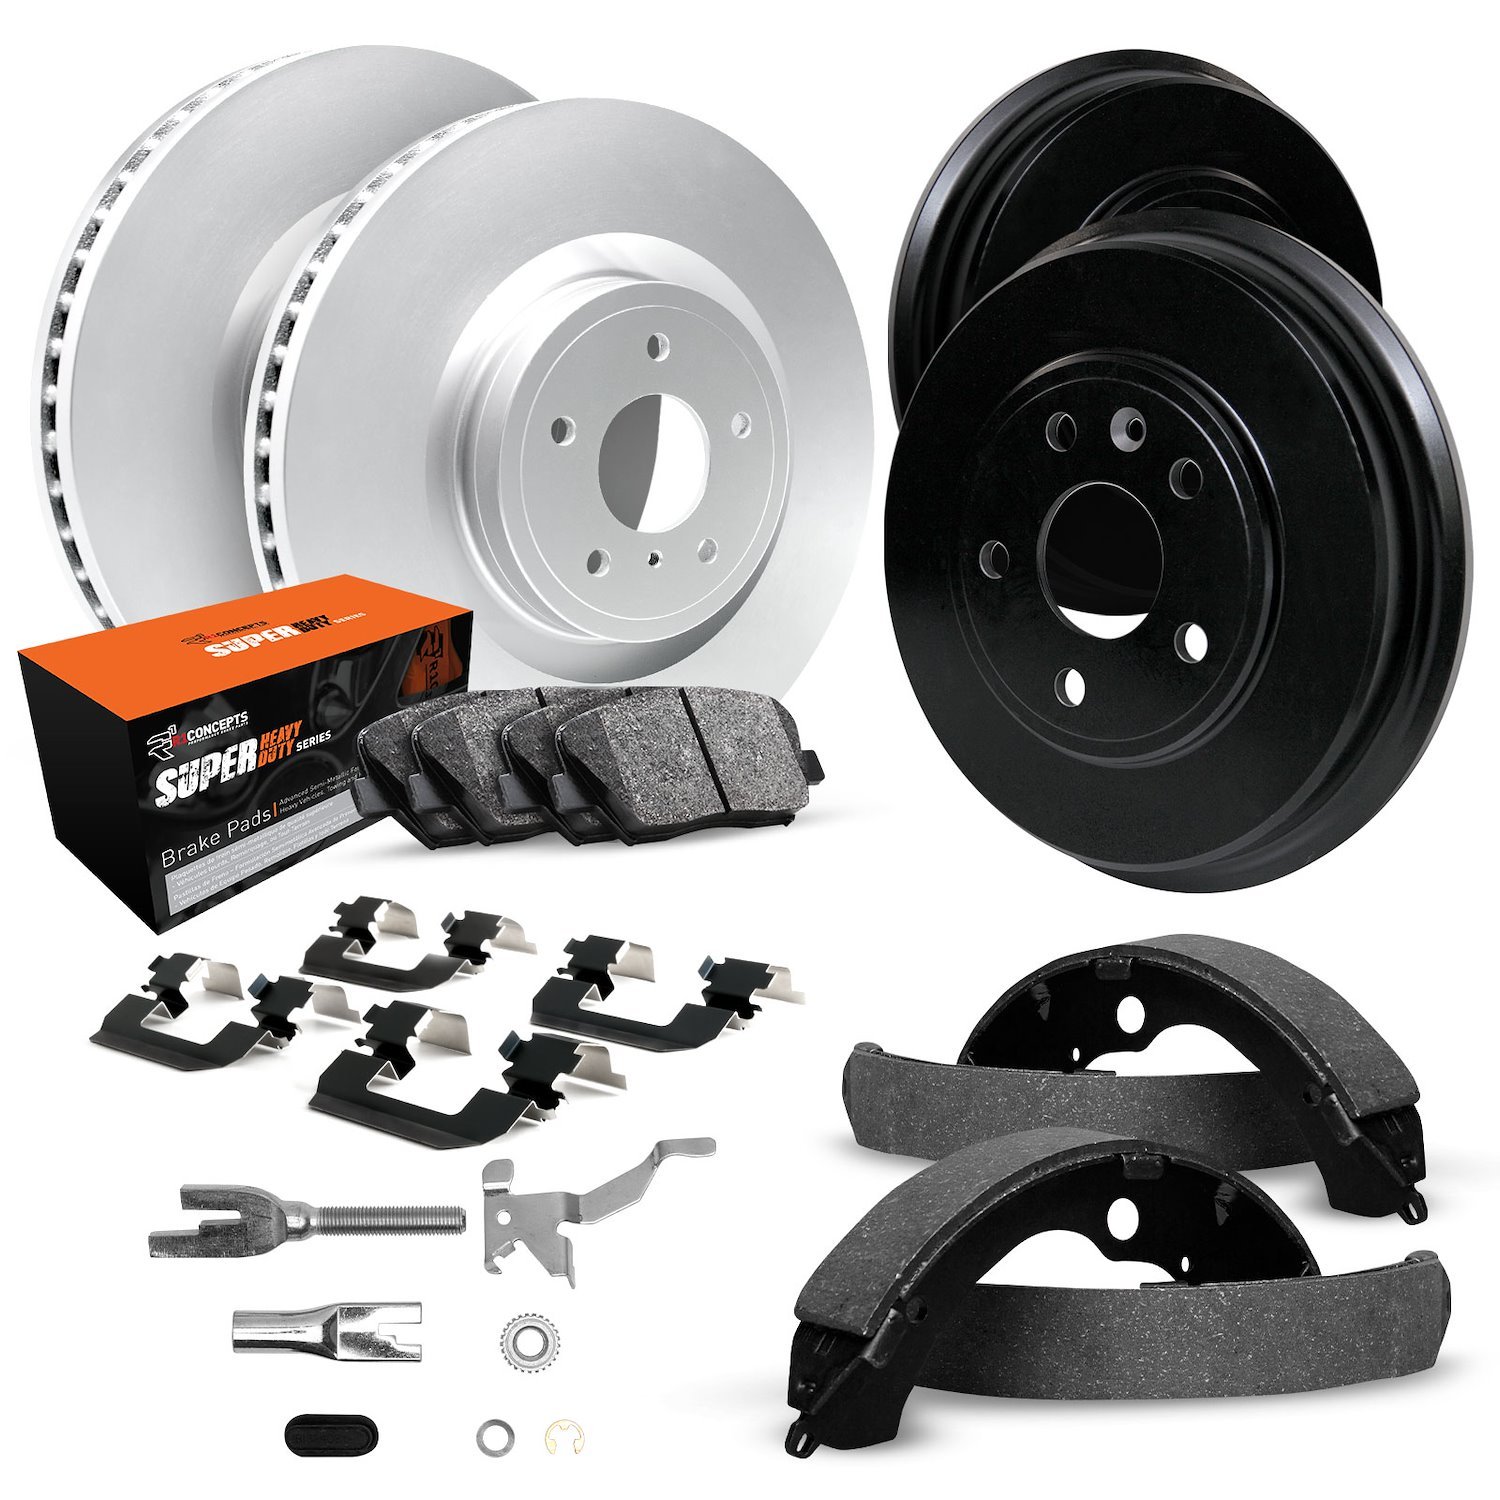 GEO-Carbon Brake Rotor & Drum Set w/Super-Duty Pads, Shoes, Hardware/Adjusters, 1995-1999 Ford/Lincoln/Mercury/Mazda